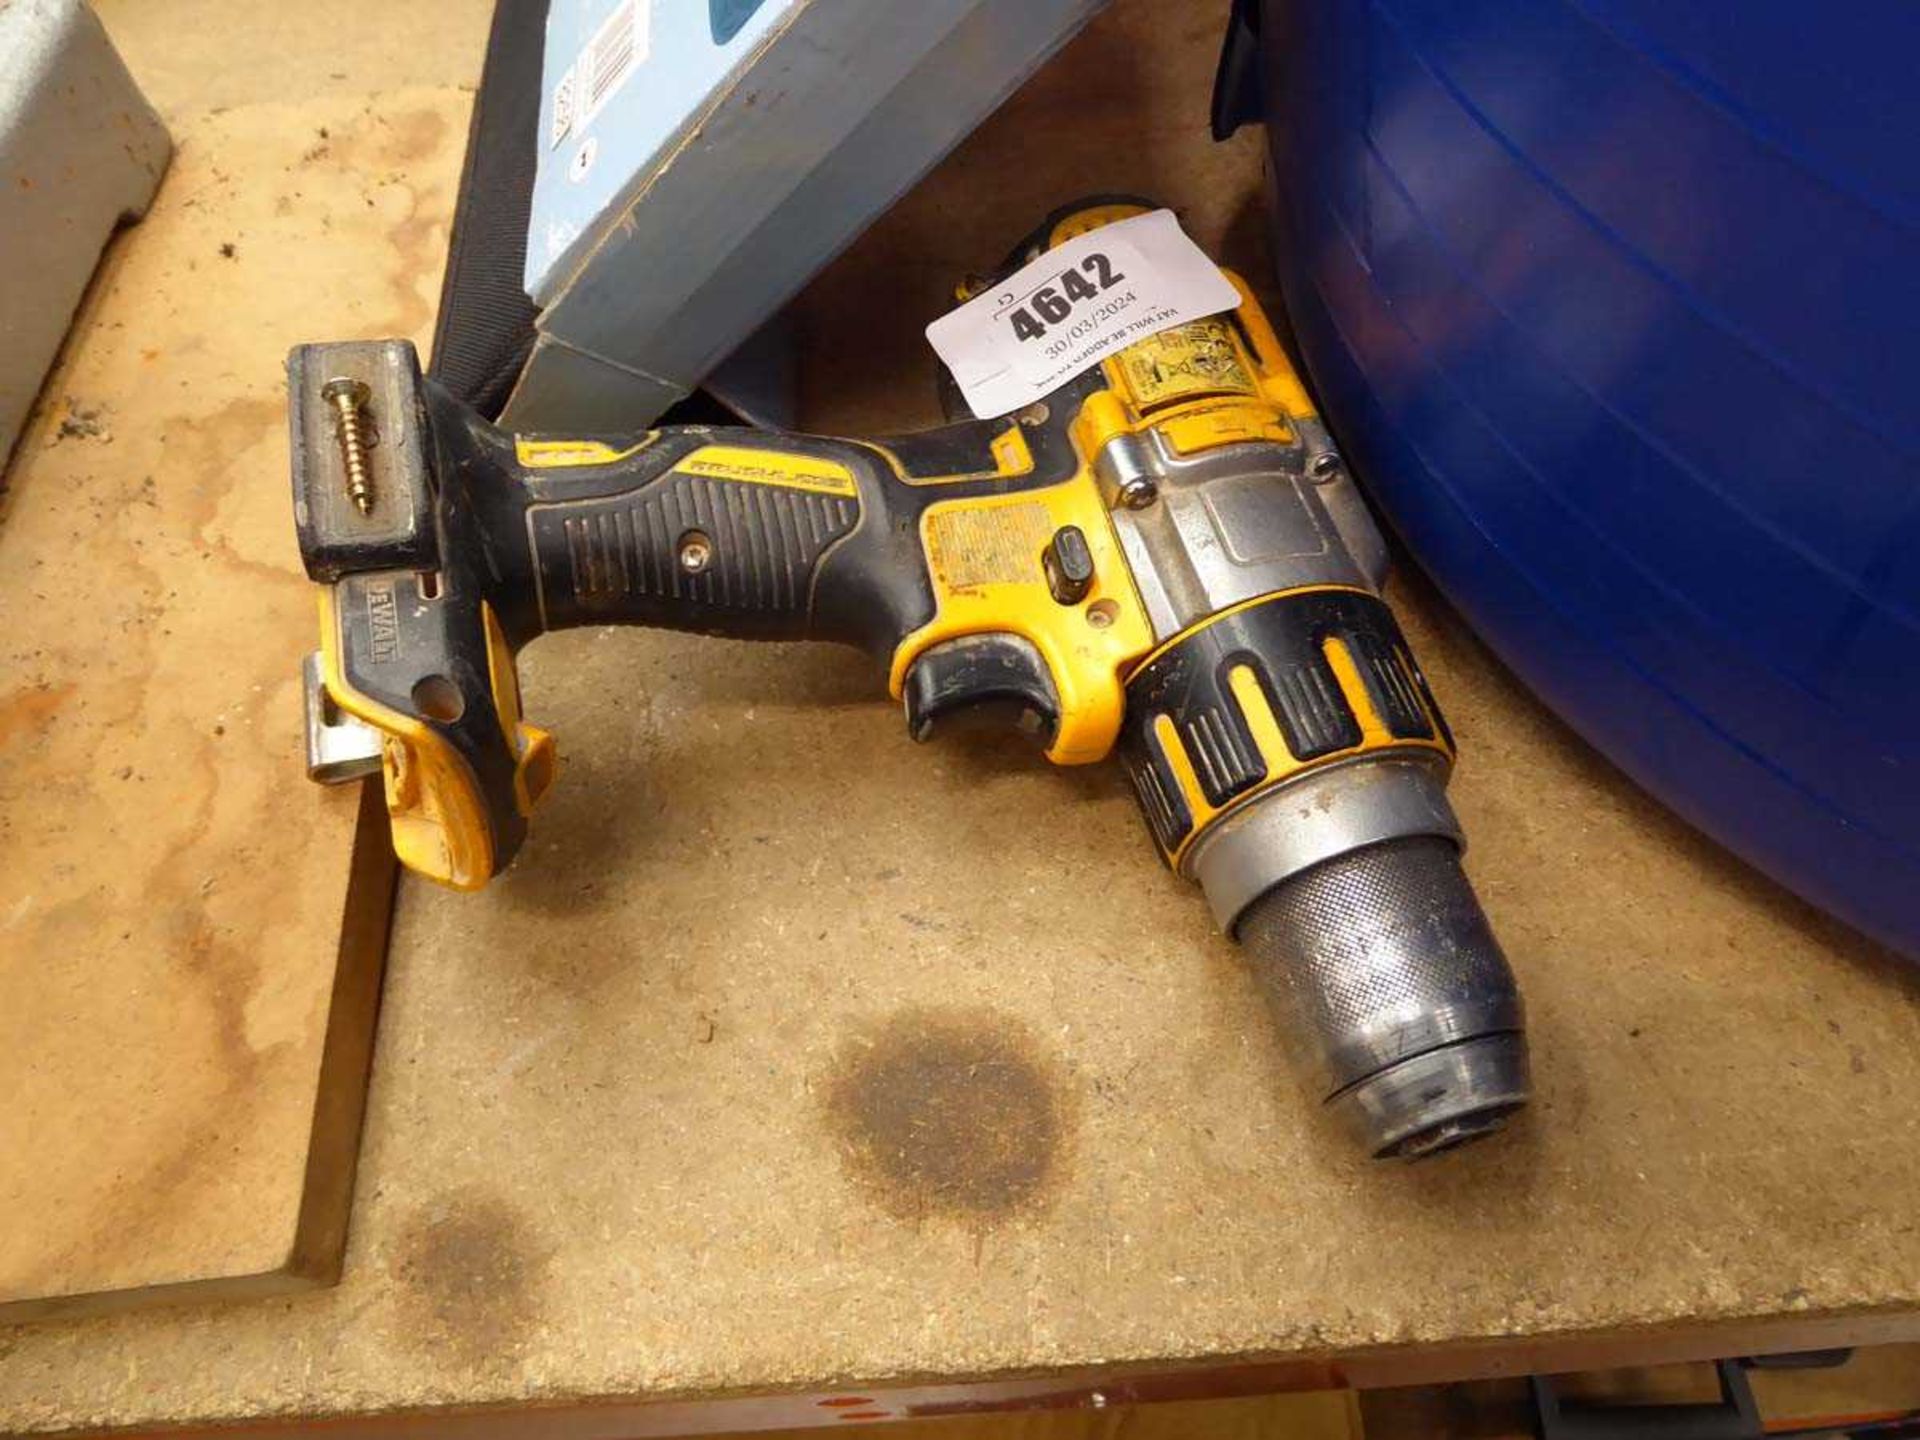 Dewalt battery drill, no batttery or charger